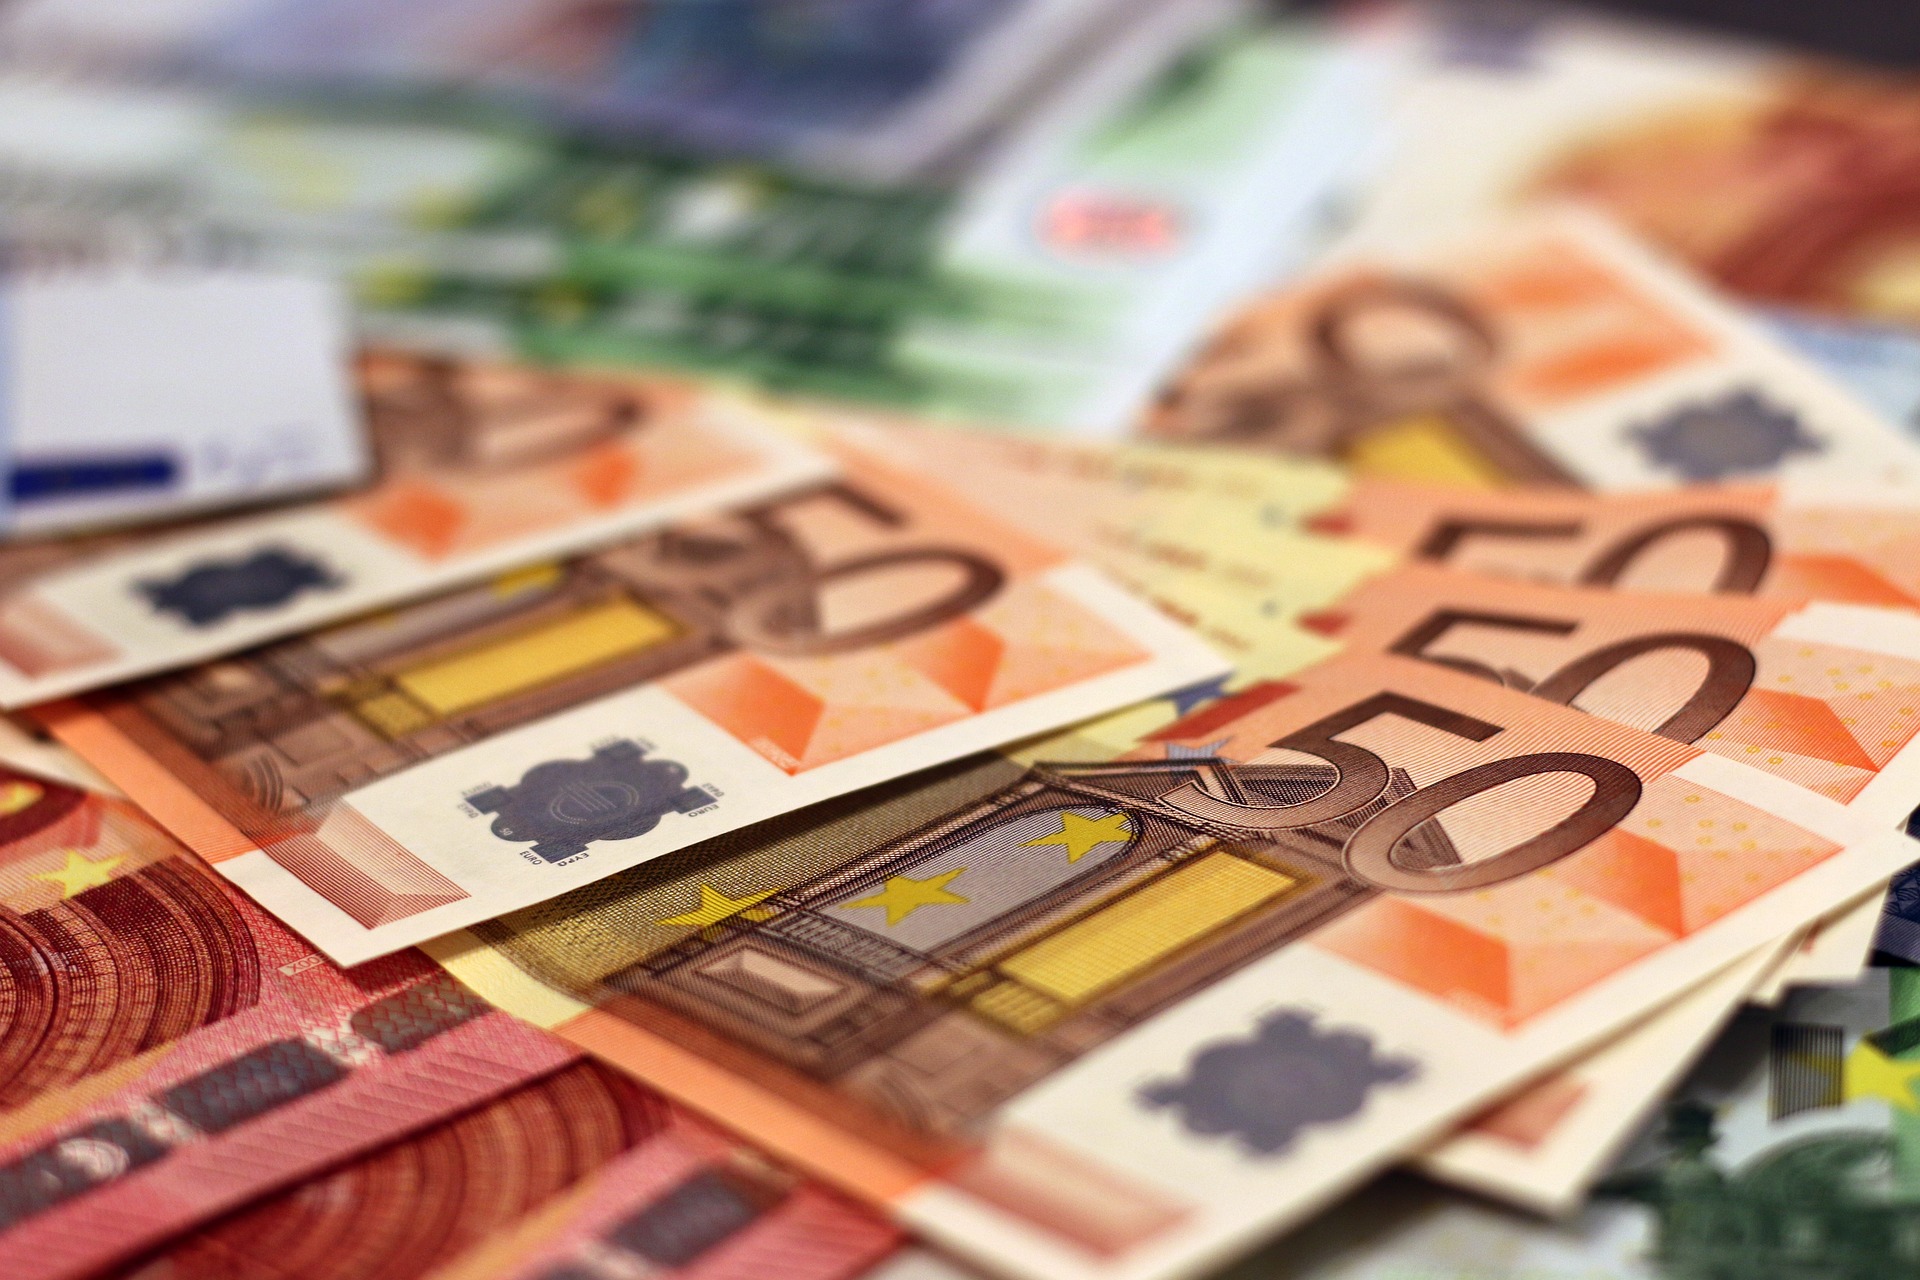 SEPA: A Guide to Streamlining Euro Payments in Europe